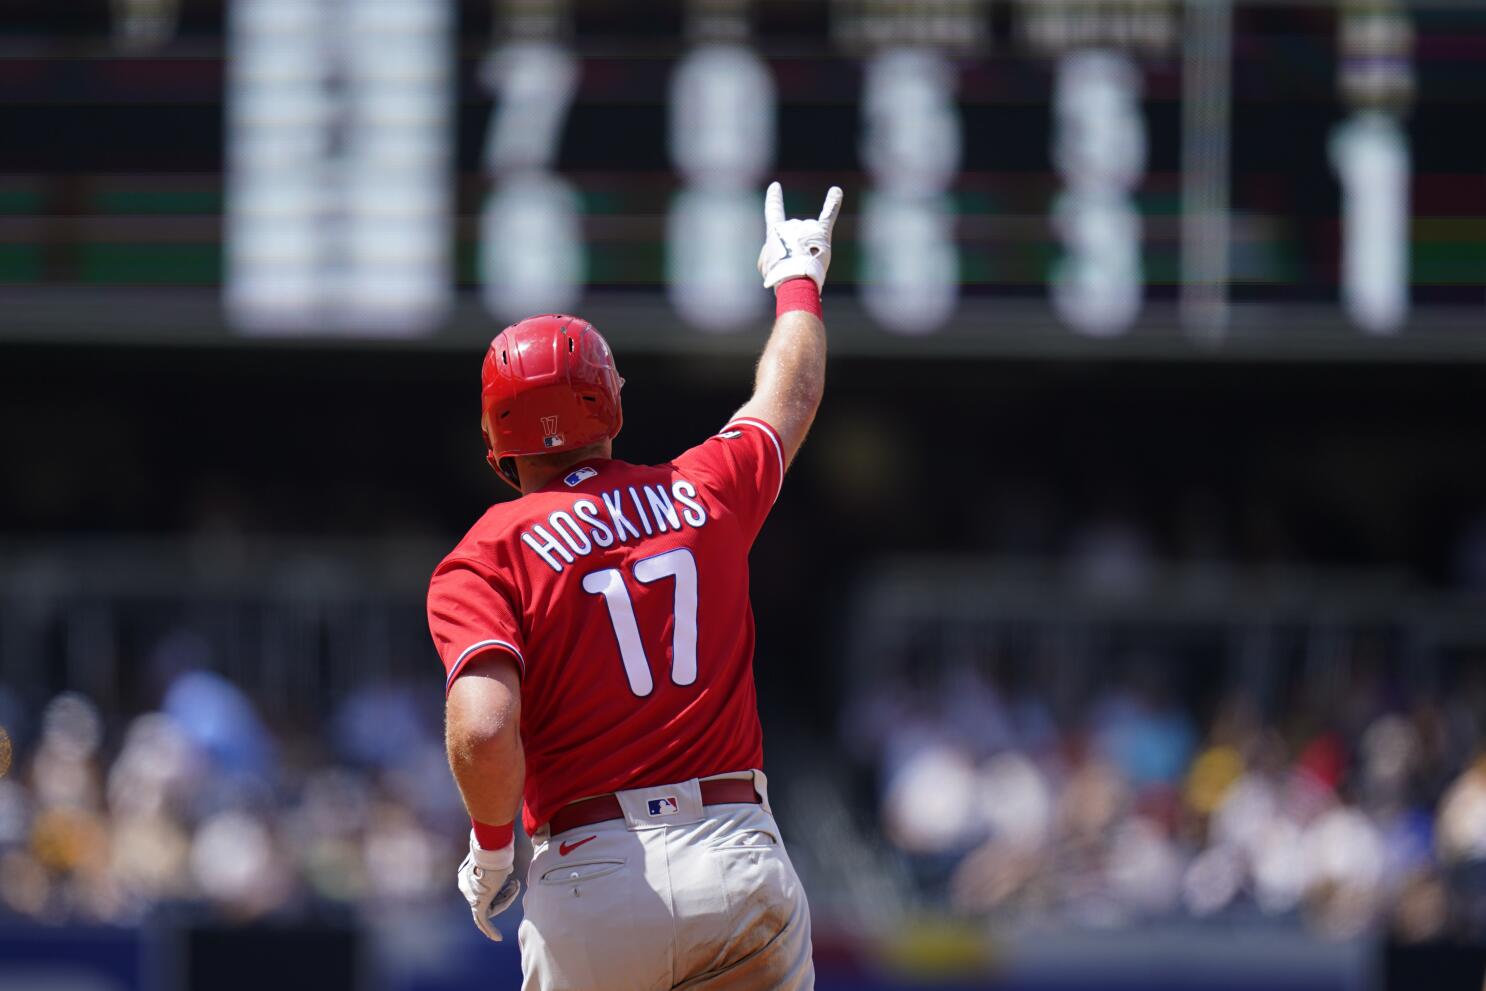 2021 Player Preview: Rhys Hoskins - The Good Phight